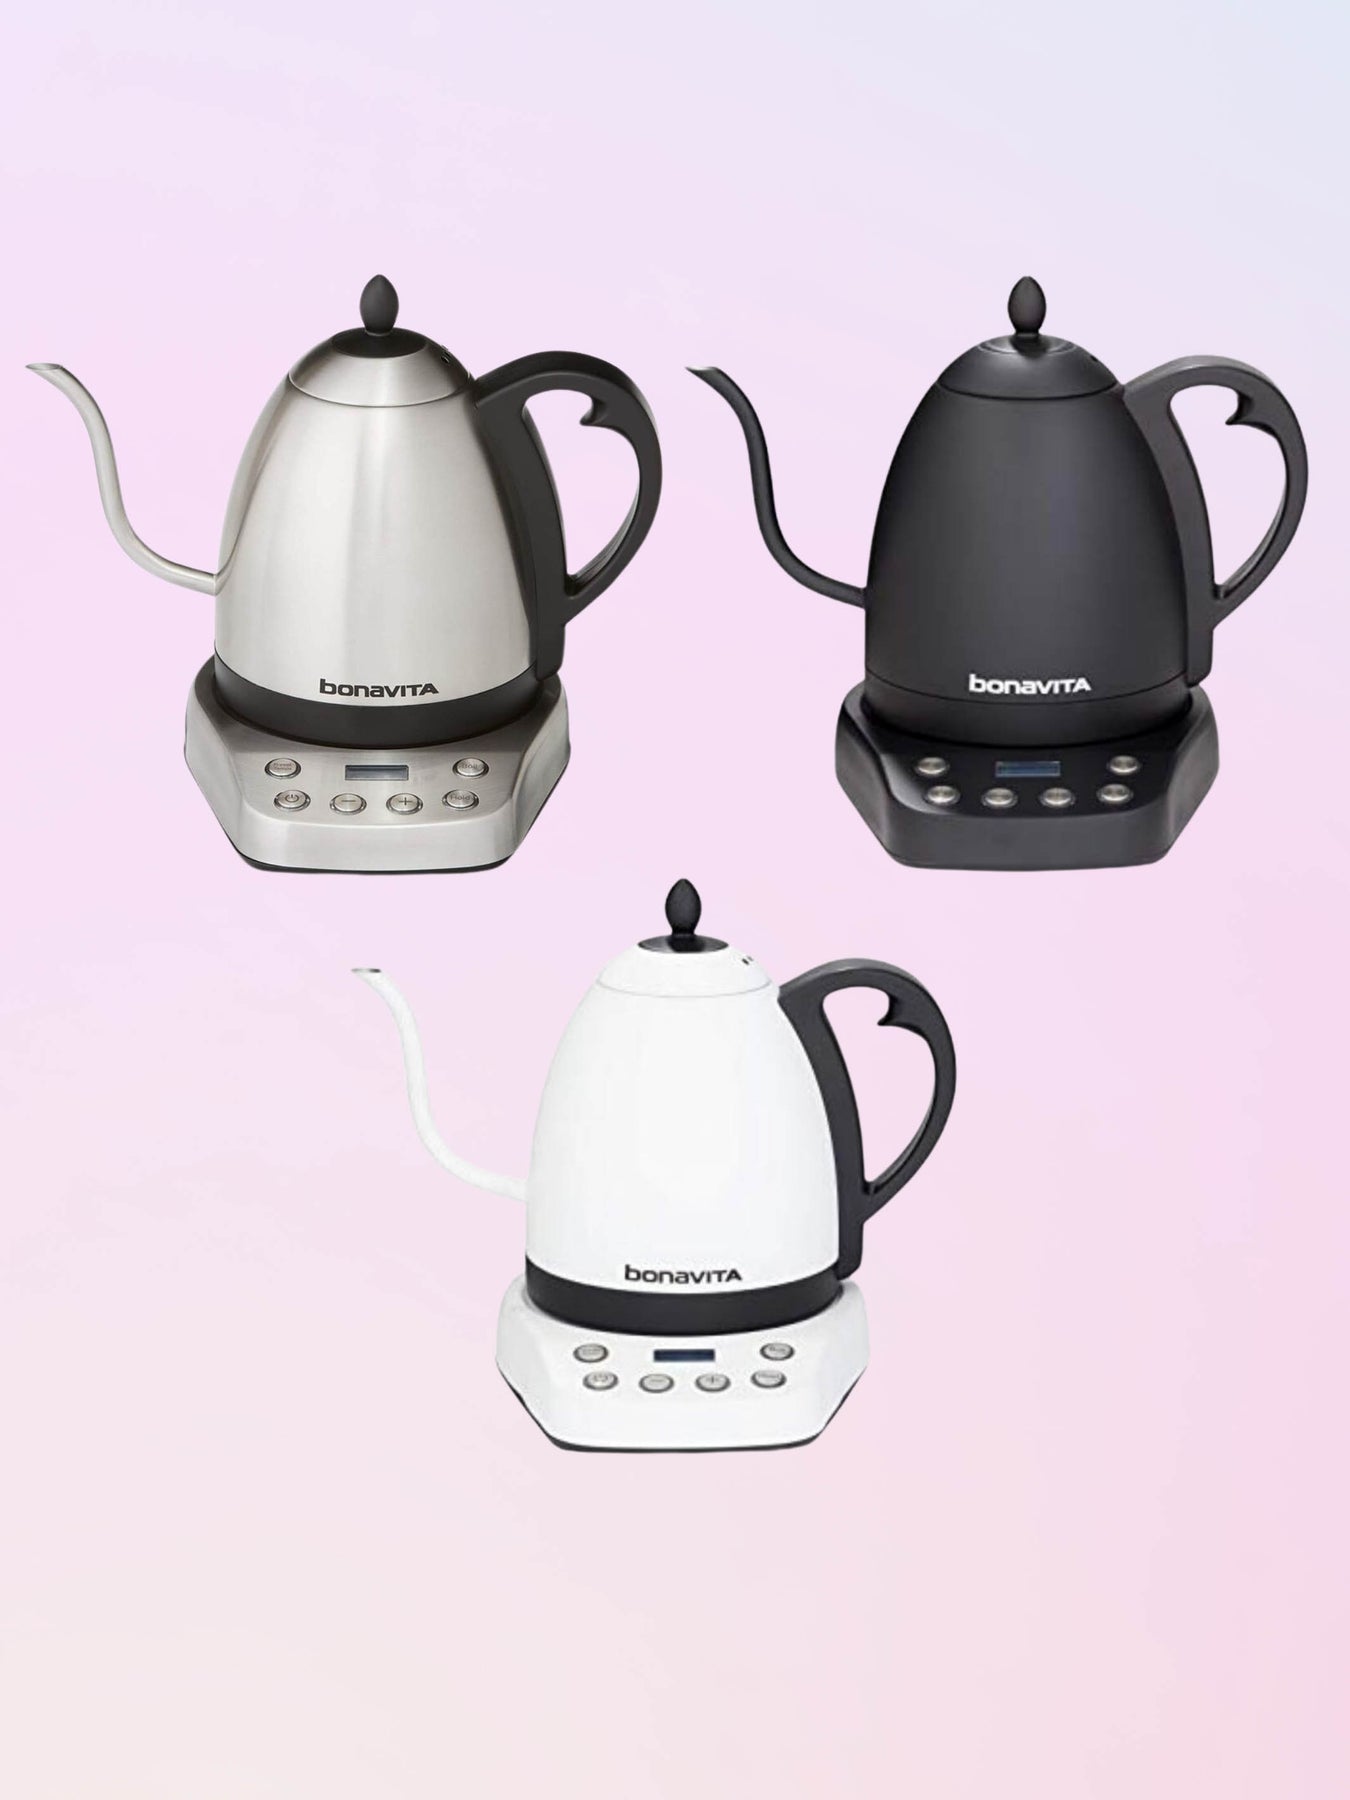 Bonavita 1.0L Electric Gooseneck Kettle – The Concentrated Cup